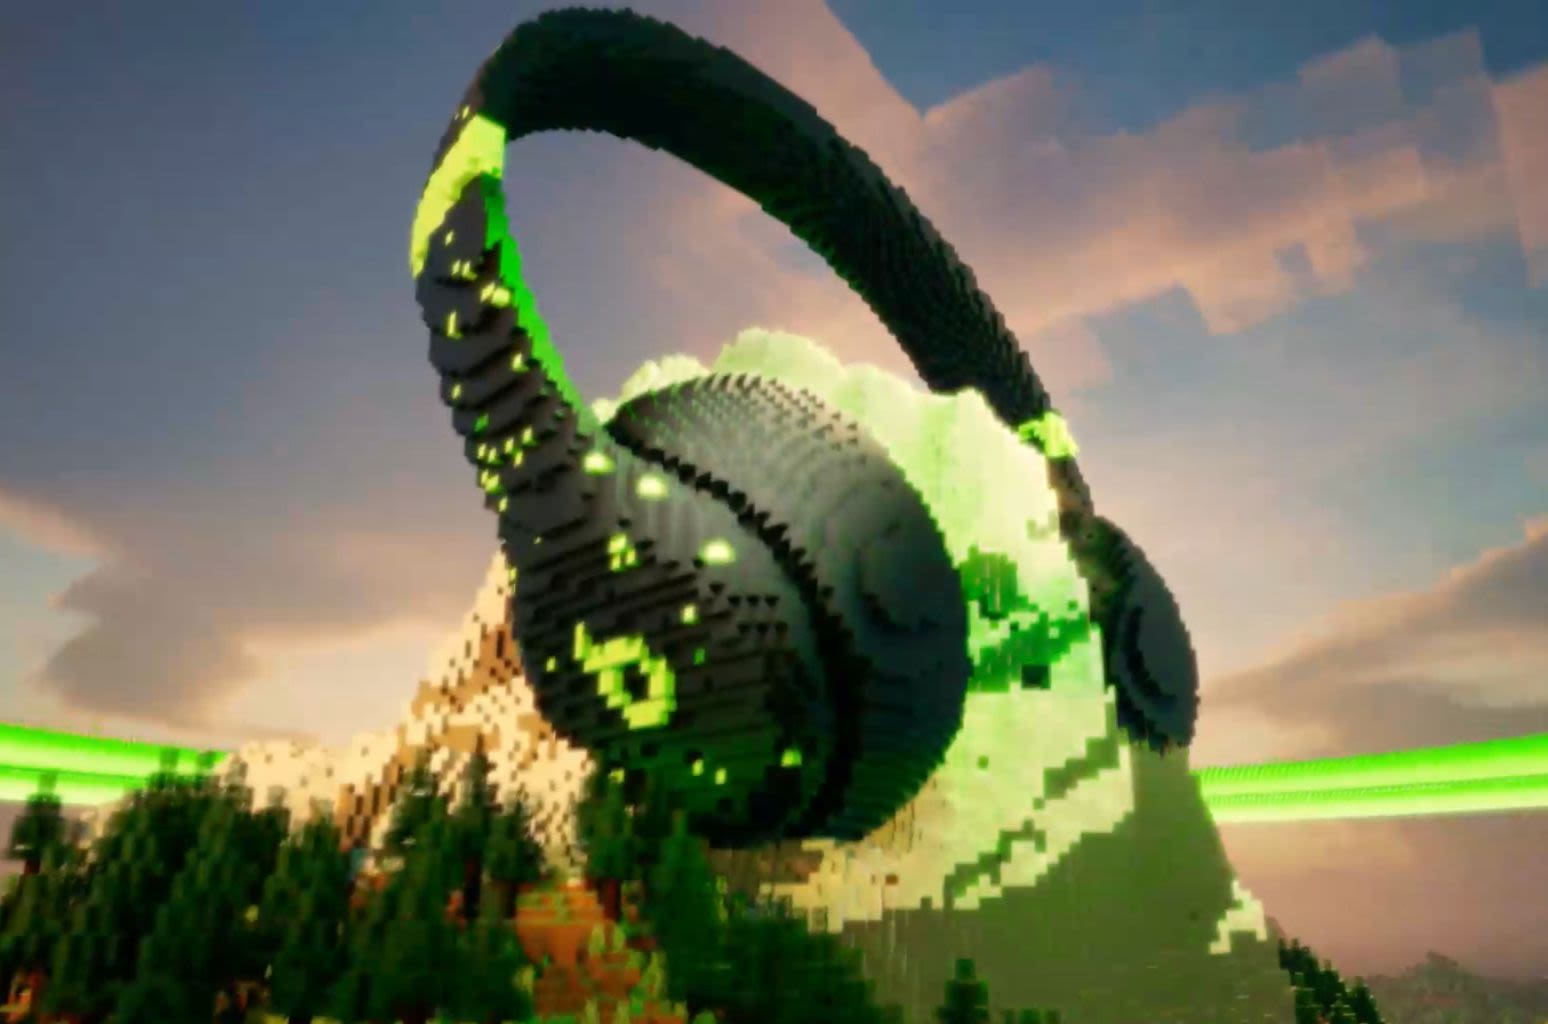 Beats & ‘Minecraft’ Collaborate on New Beats Solo 4 Wireless Headphones: Here’s Where to Buy a Pair Online